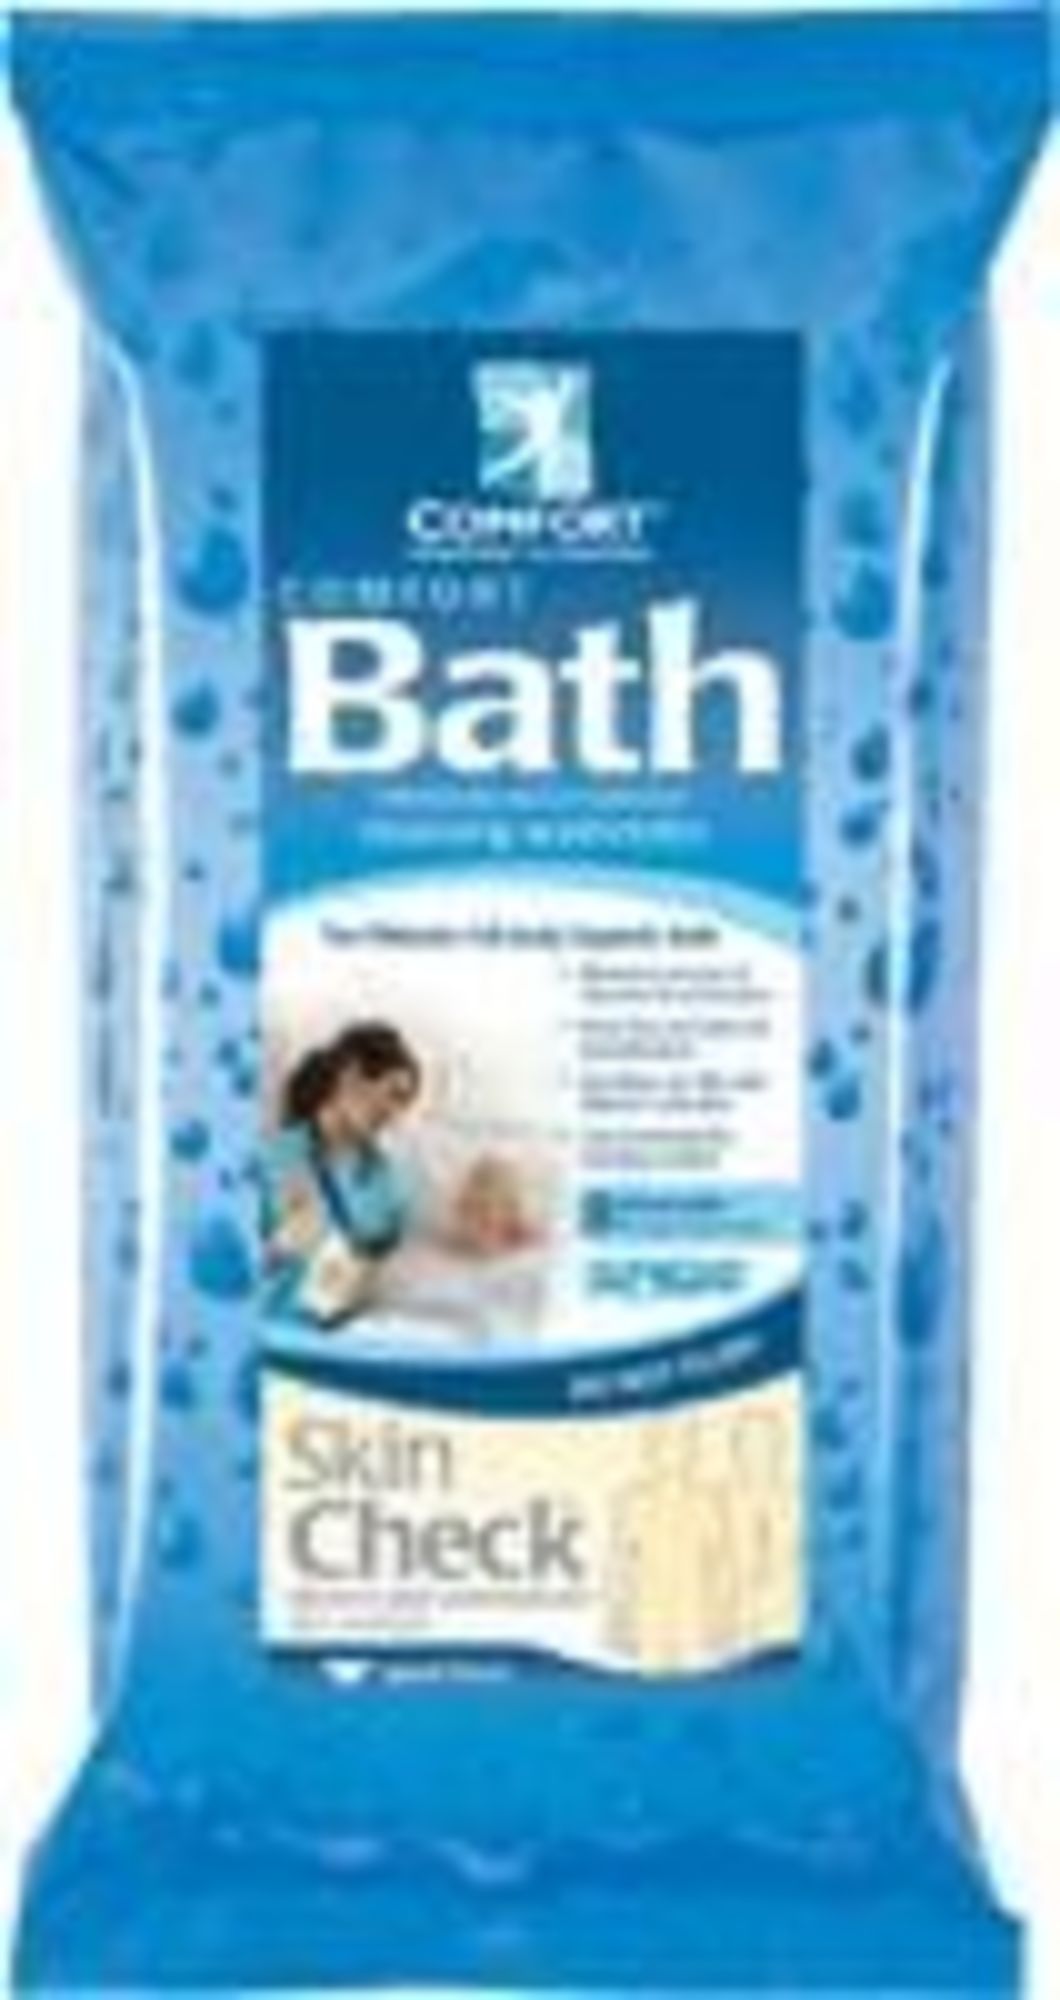 Comfort Bath Bath Wipe 8 X 8 Inch Soft Pack Aloe Scented Pack of 8 - image 1 of 4